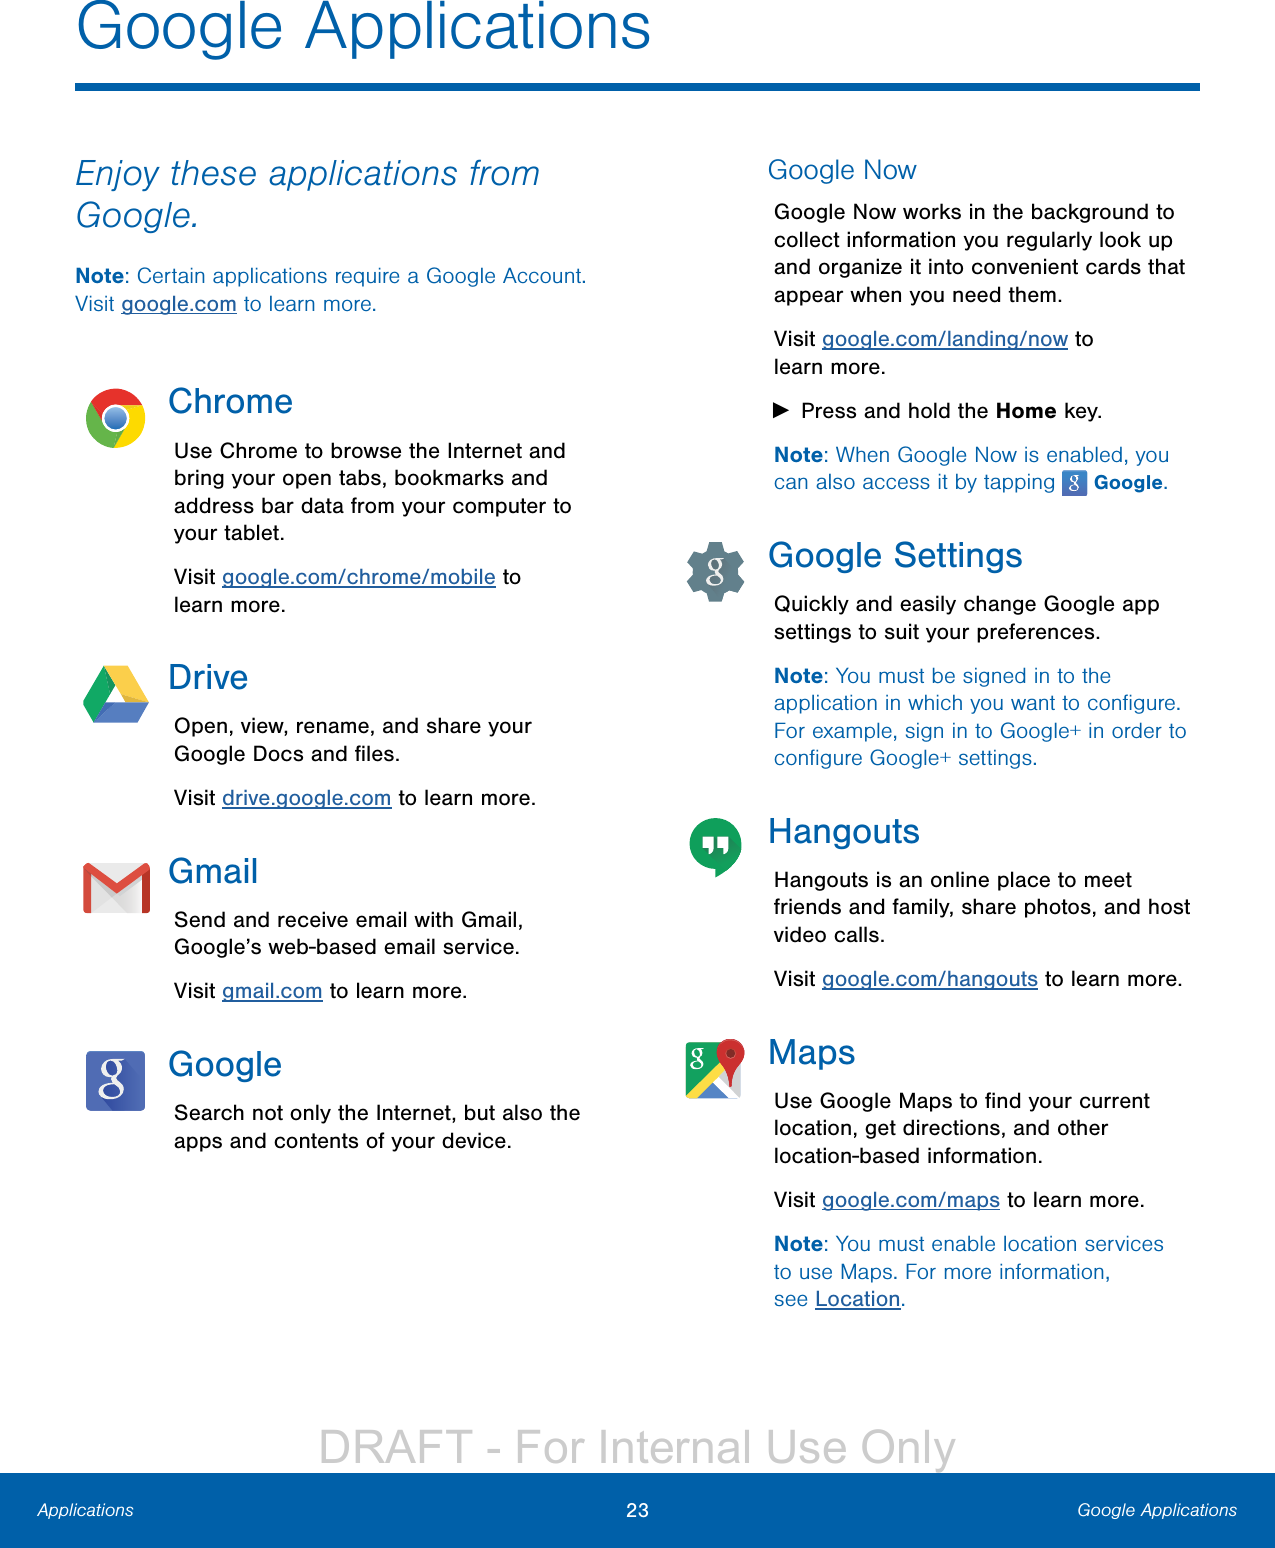 23 Google ApplicationsApplicationsEnjoy these applications from Google.Note: Certain applications require a Google Account. Visit google.com to learn more.ChromeUse Chrome to browse the Internet and bring your open tabs, bookmarks and address bar data from your computer to your tablet.Visit google.com/chrome/mobile to learnmore.DriveOpen, view, rename, and share your Google Docs and ﬁles.Visit drive.google.com to learn more.GmailSend and receive email with Gmail, Google’s web-based email service.Visit gmail.com to learn more.GoogleSearch not only the Internet, but also the apps and contents of your device.Google NowGoogle Now works in the background to collect information you regularly look up and organize it into convenient cards that appear when you need them.Visit google.com/landing/now to learnmore. ►Press and hold the Home key.Note: When Google Now is enabled, you can also access it by tapping   Google.Google SettingsQuickly and easily change Google app settings to suit your preferences.Note: You must be signed in to the application in which you want to conﬁgure. For example, sign in to Google+ in order to conﬁgure Google+ settings.HangoutsHangouts is an online place to meet friends and family, share photos, and host video calls.Visit google.com/hangouts to learn more. MapsUse Google Maps to ﬁnd your current location, get directions, and other location-based information.Visit google.com/maps to learn more.Note: You must enable location services to use Maps. For more information, seeLocation.Google ApplicationsDRAFT - For Internal Use Only